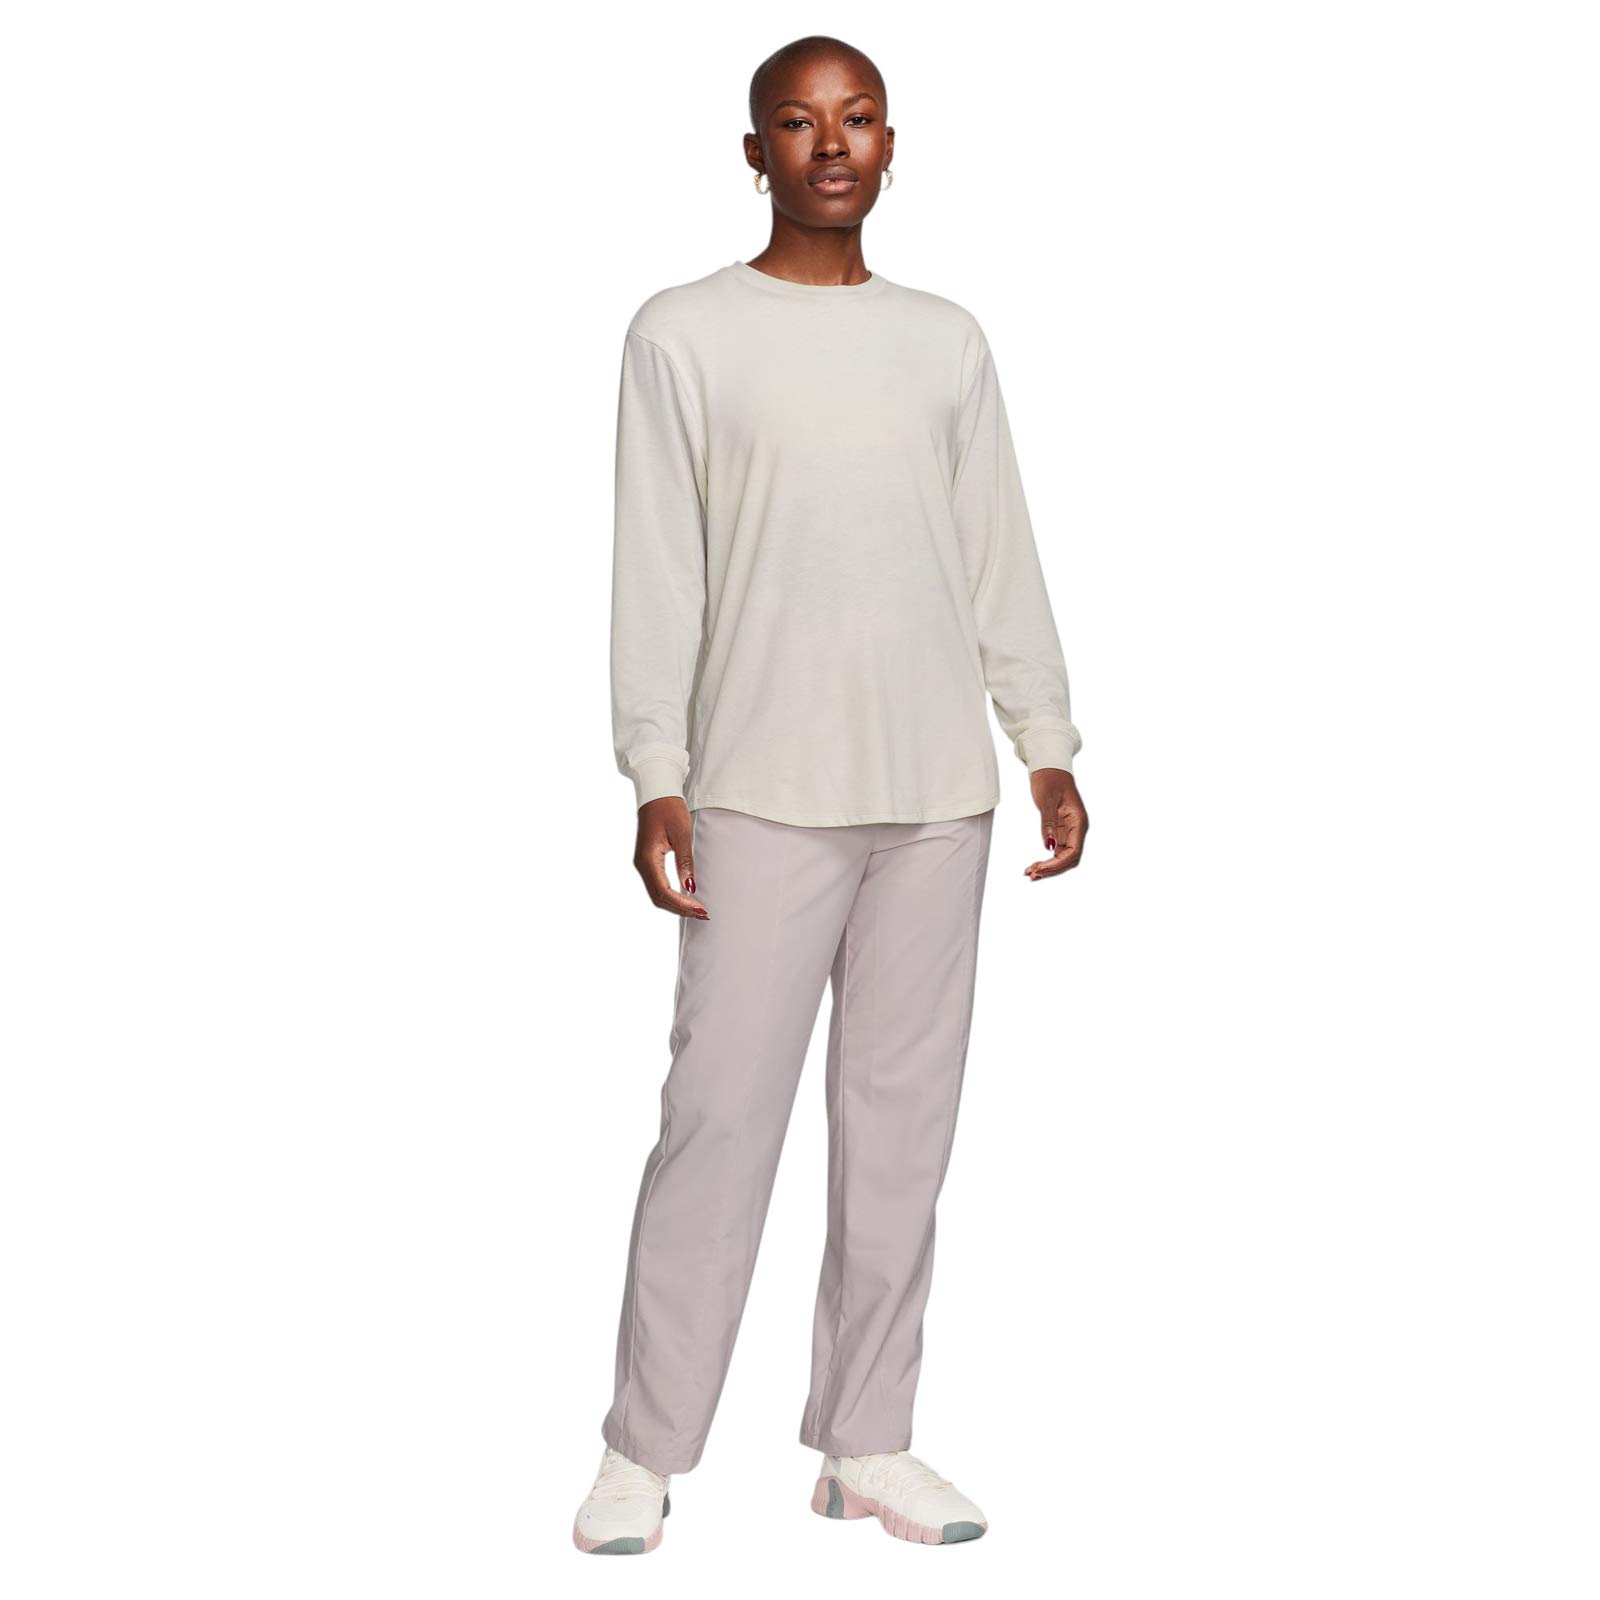 NIKE ONE RELAXED WOMENS DRI-FIT LONG-SLEEVE TOP